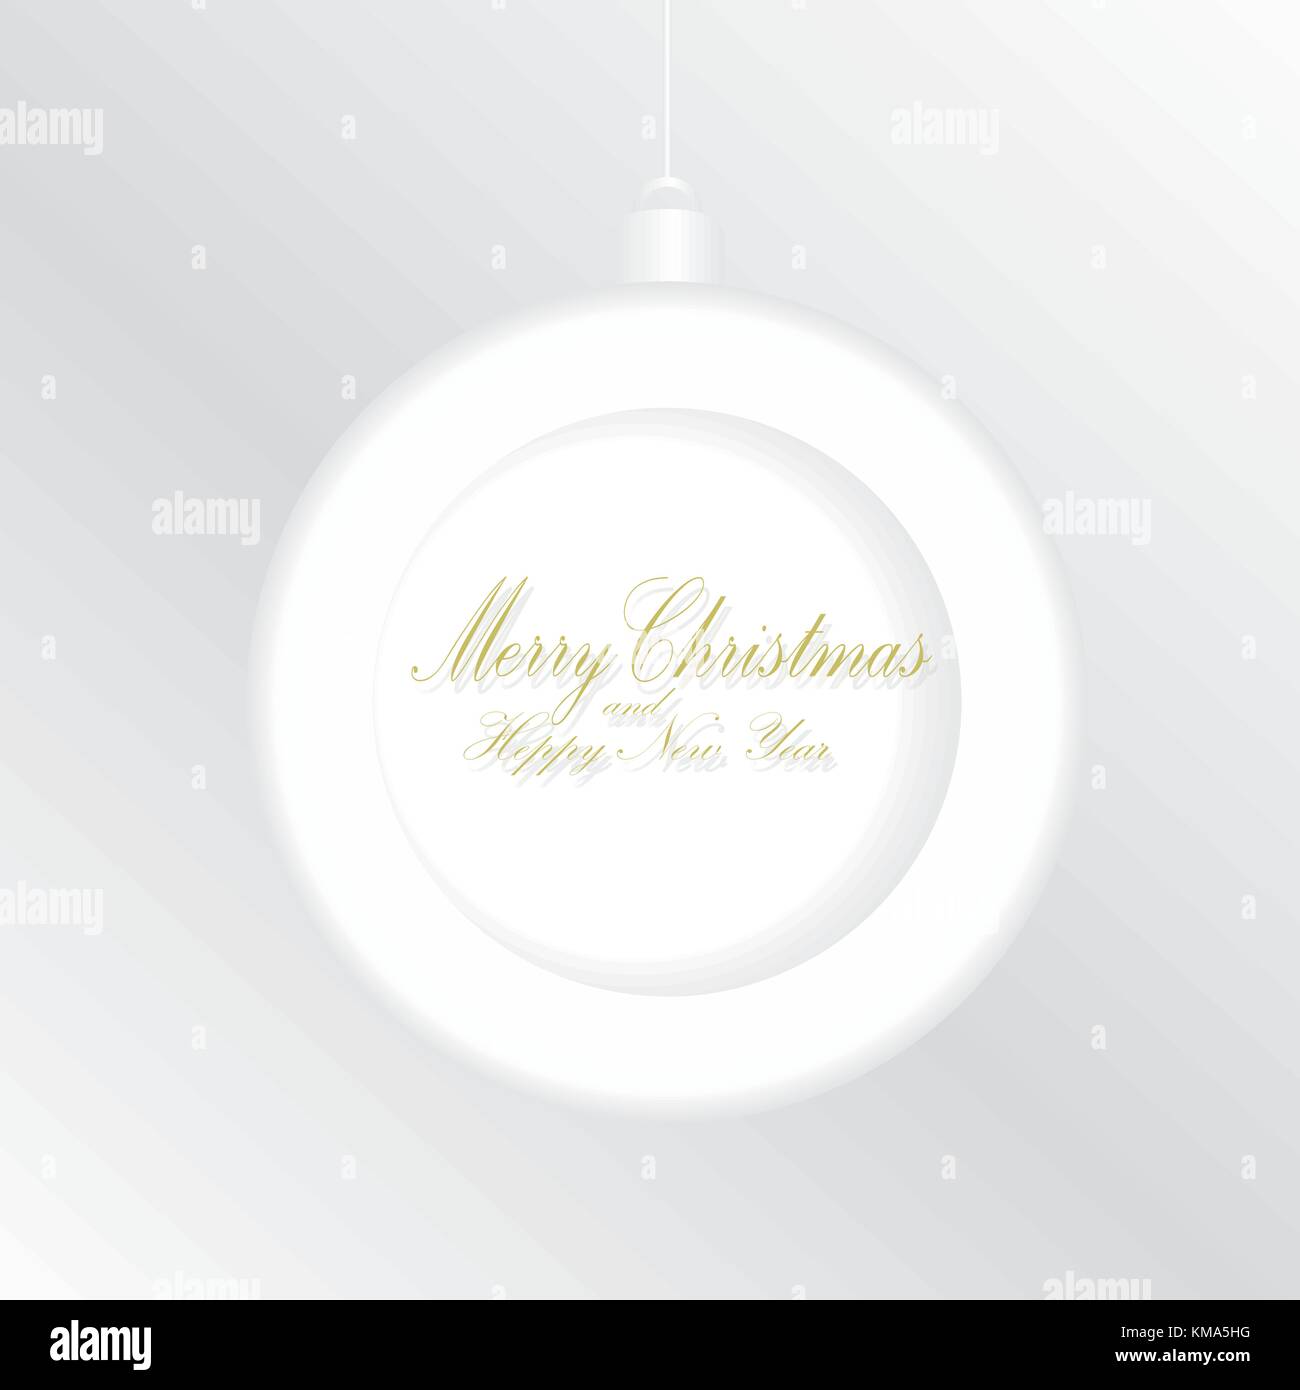 Greeting card with Merry Christmas. Vector illustration Stock Vector